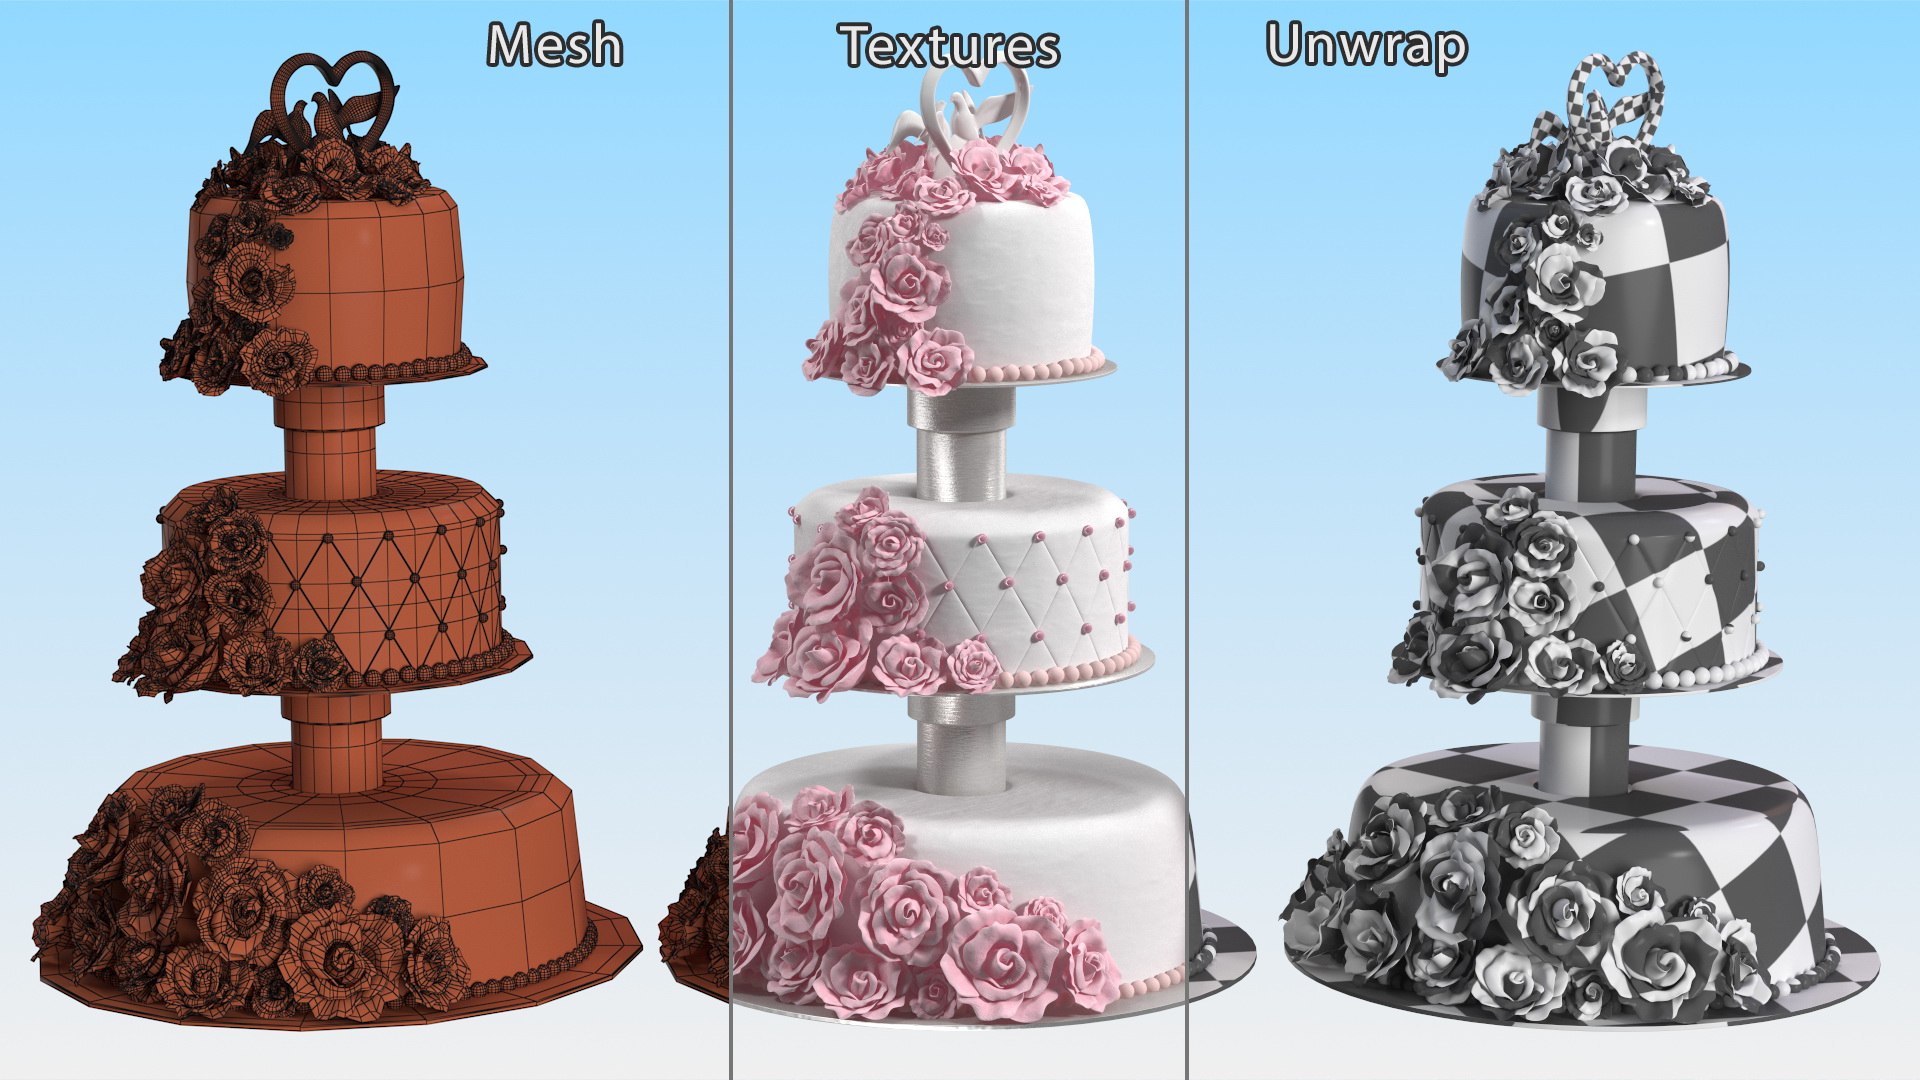 The Sims 4 My Wedding Stories: Your Guide to Wedding Cakes!